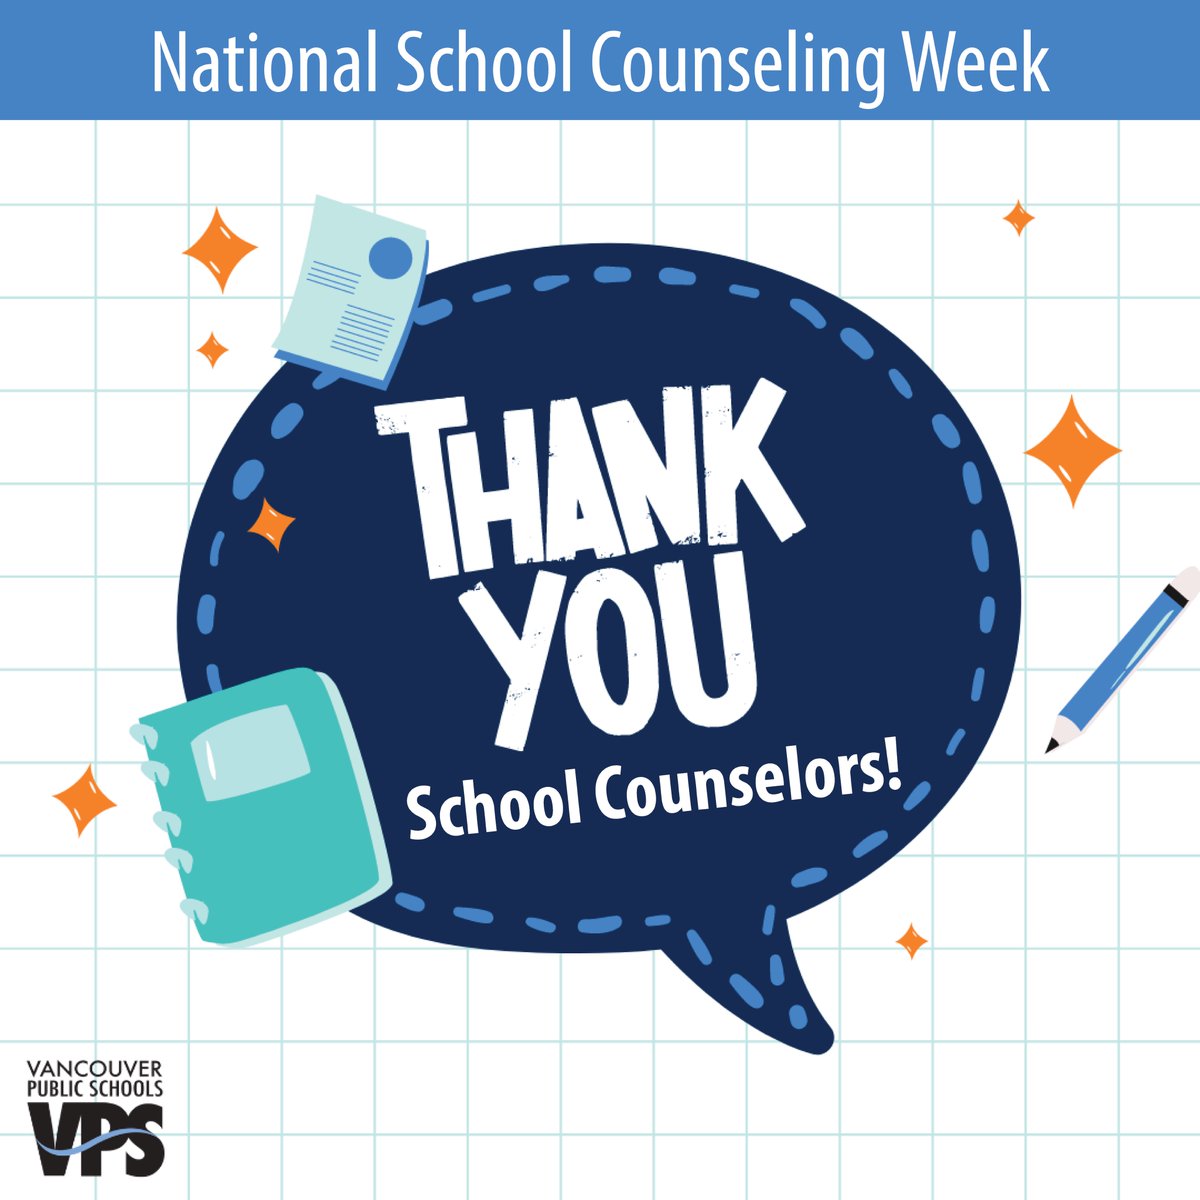 It's #NationalSchoolCounselingWeek! Our school counselors help students develop the skills needed to be successful in school and life — including academics, social-emotional learning, and life readiness. #TeamVPS #ThankASchoolCounselor